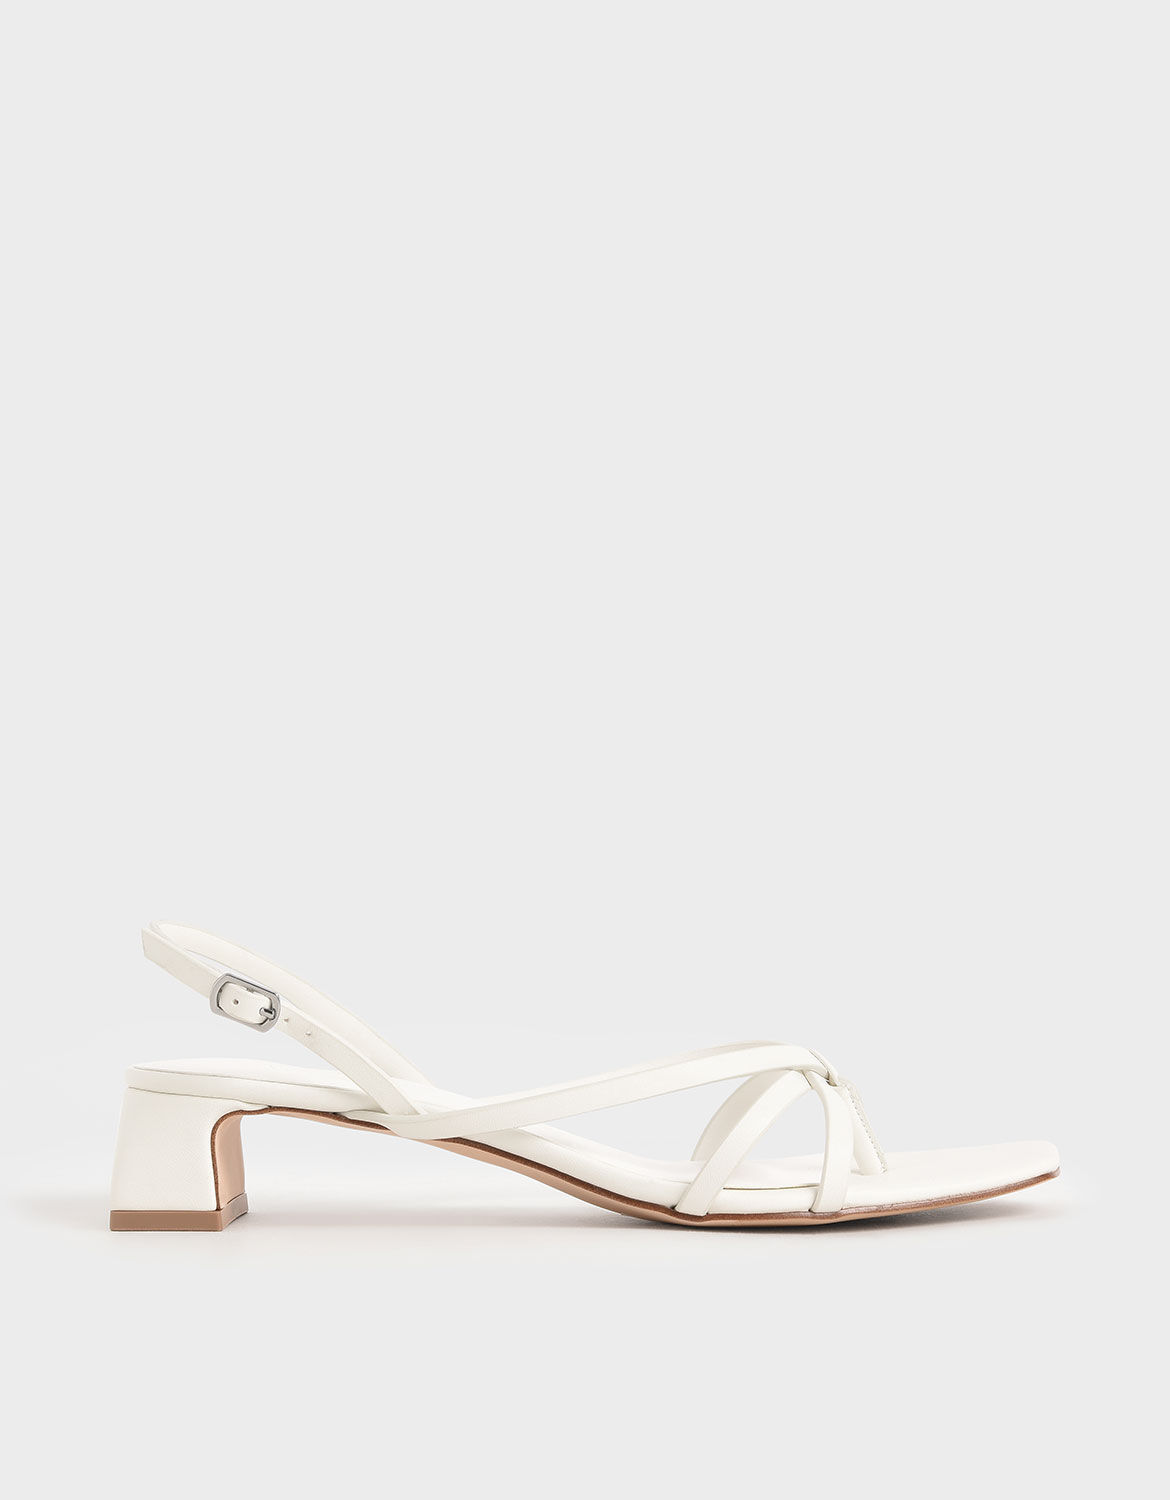 White Strappy Sandals | CHARLES \u0026 KEITH USD